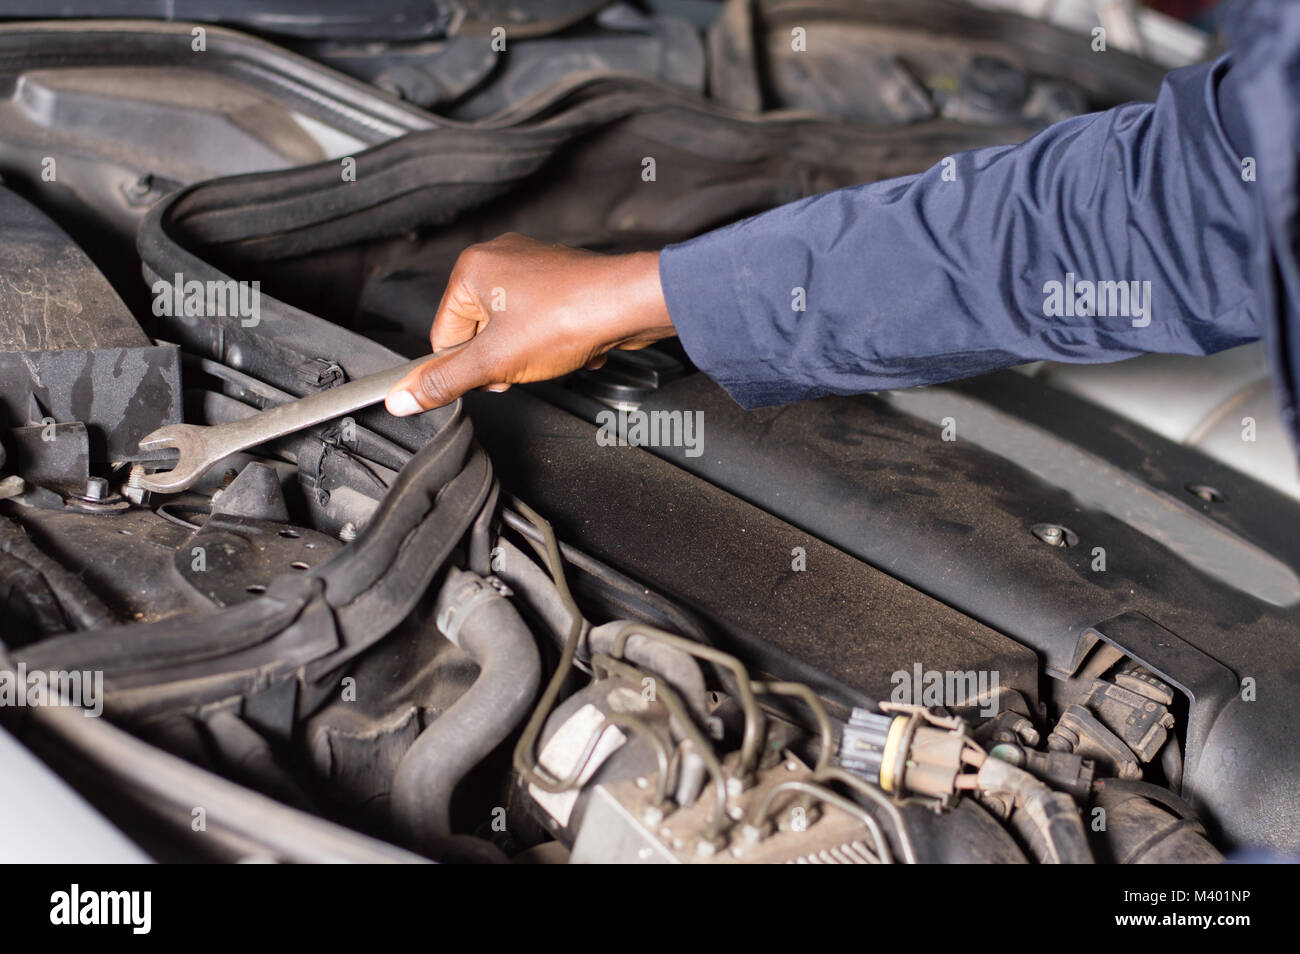 Close-up of a hand holding a key on the engine of a broken car. Stock Photo